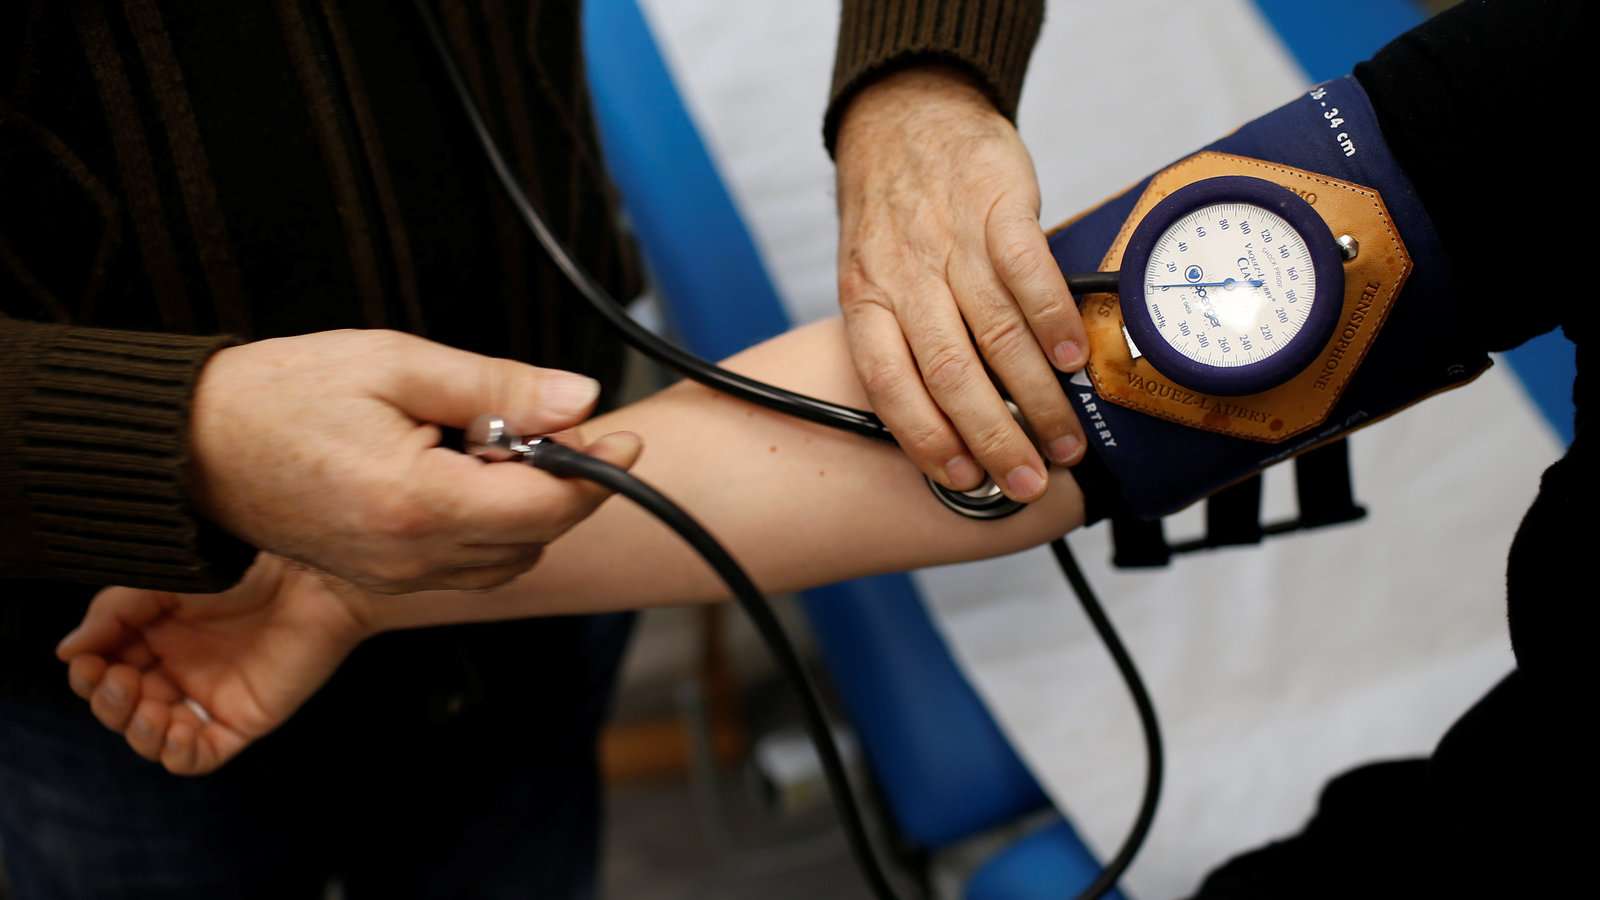 How Low Should Blood Pressure Go?